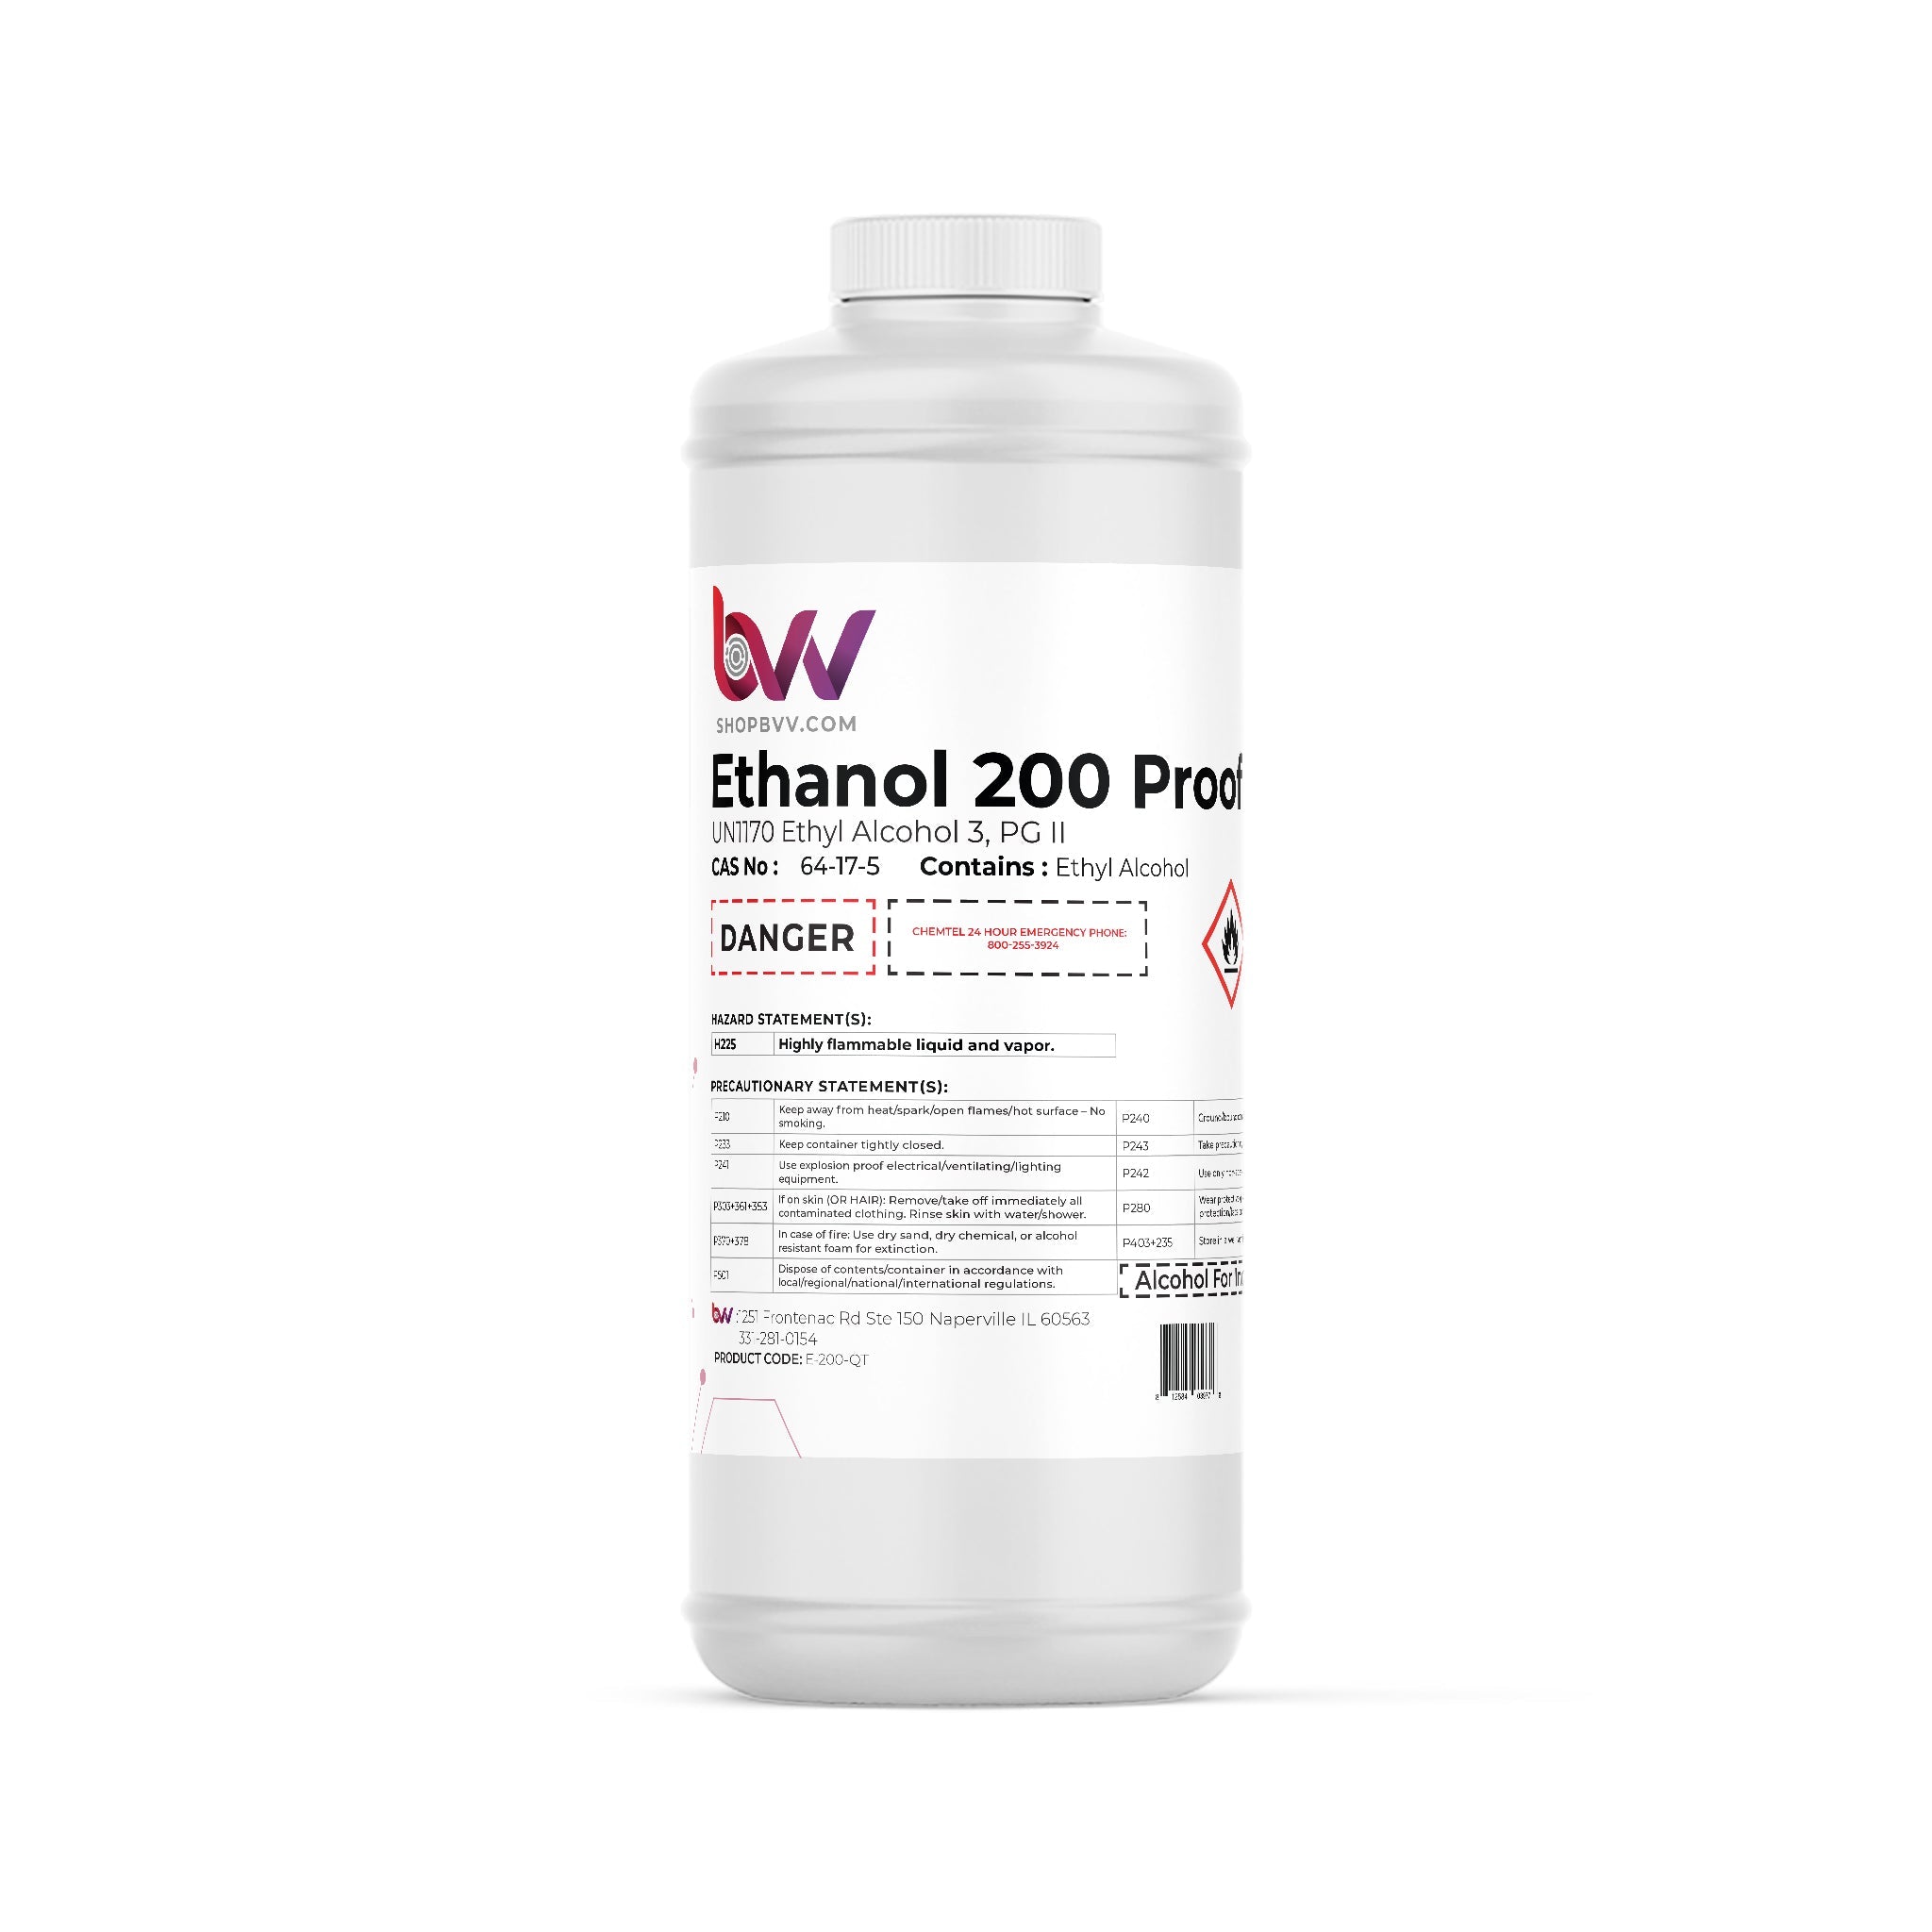 BVV Food & Lab Grade 200 Proof Ethanol - 99.97% - USP-NF, Kosher - Excise Tax Included